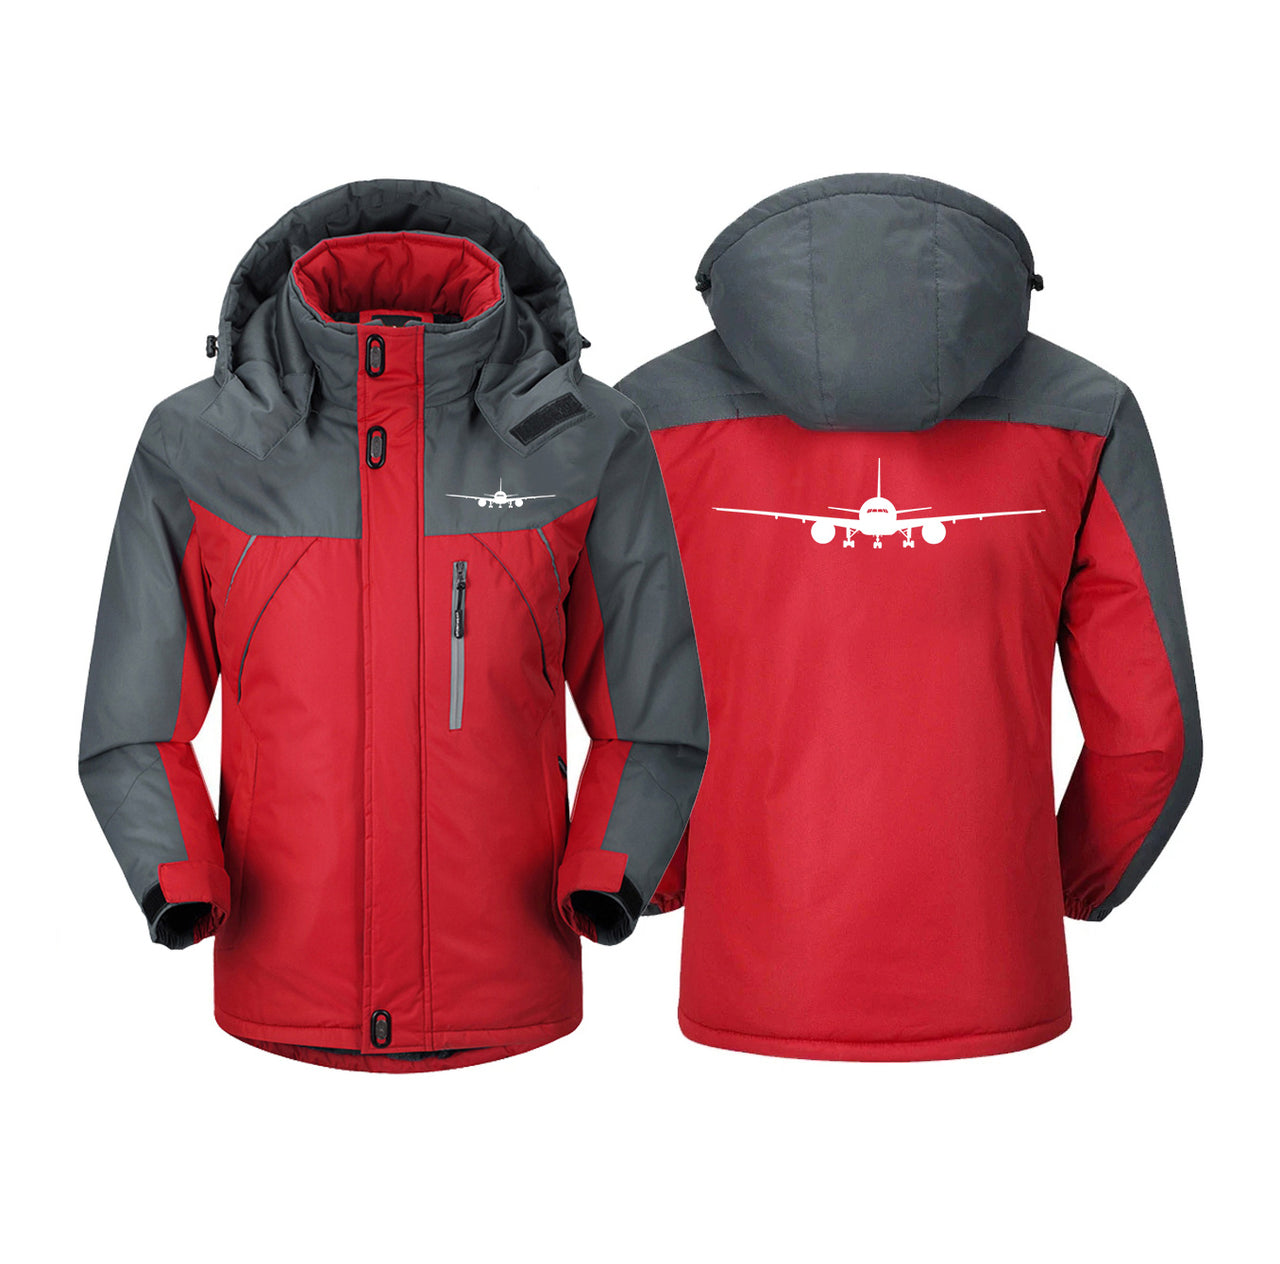 Boeing 777 Silhouette Designed Thick Winter Jackets